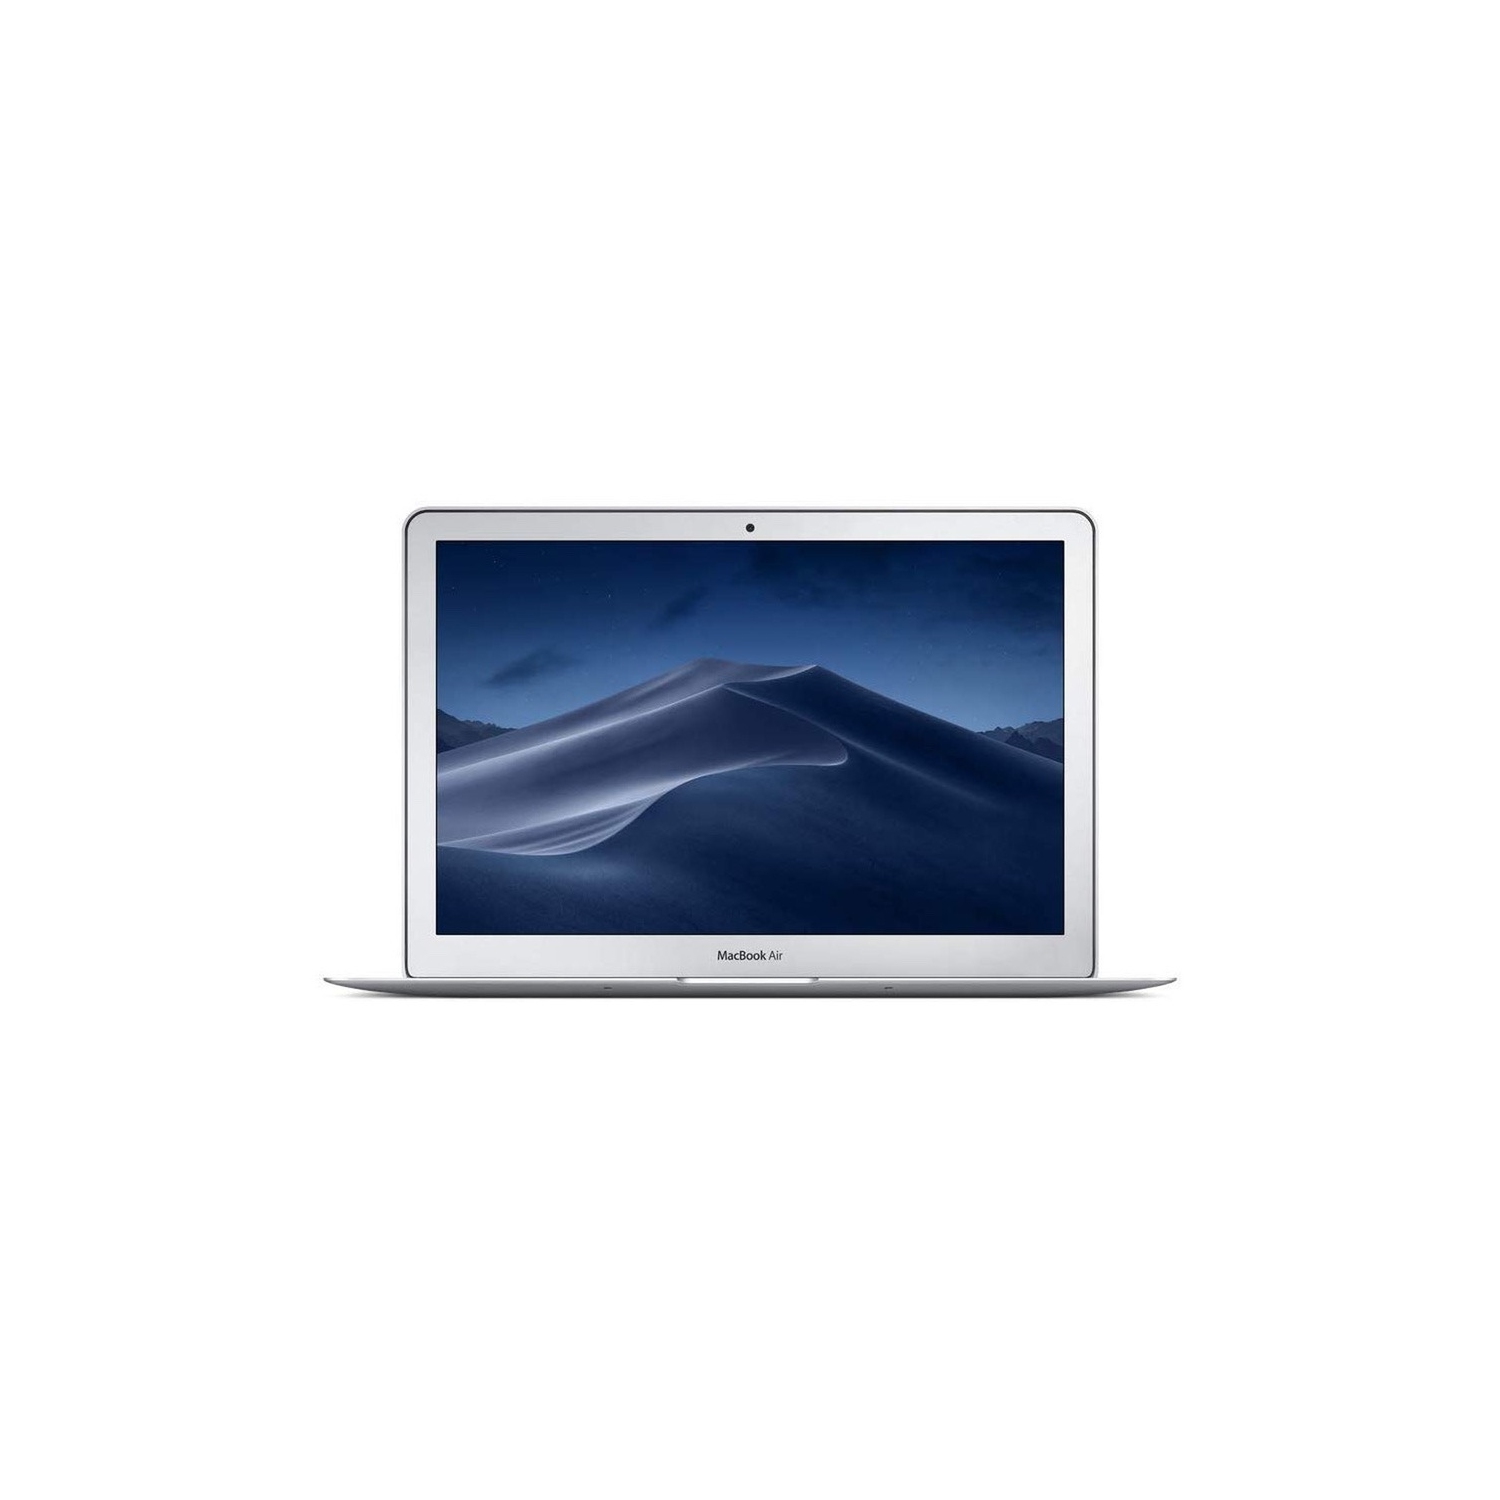 Refurbished (Excellent) - Apple MacBook Air 13" 2017-(1.8 GHz Intel Core i5/8GB RAM/256GB SSD) with 1 Year Warranty - Certified Refurbished